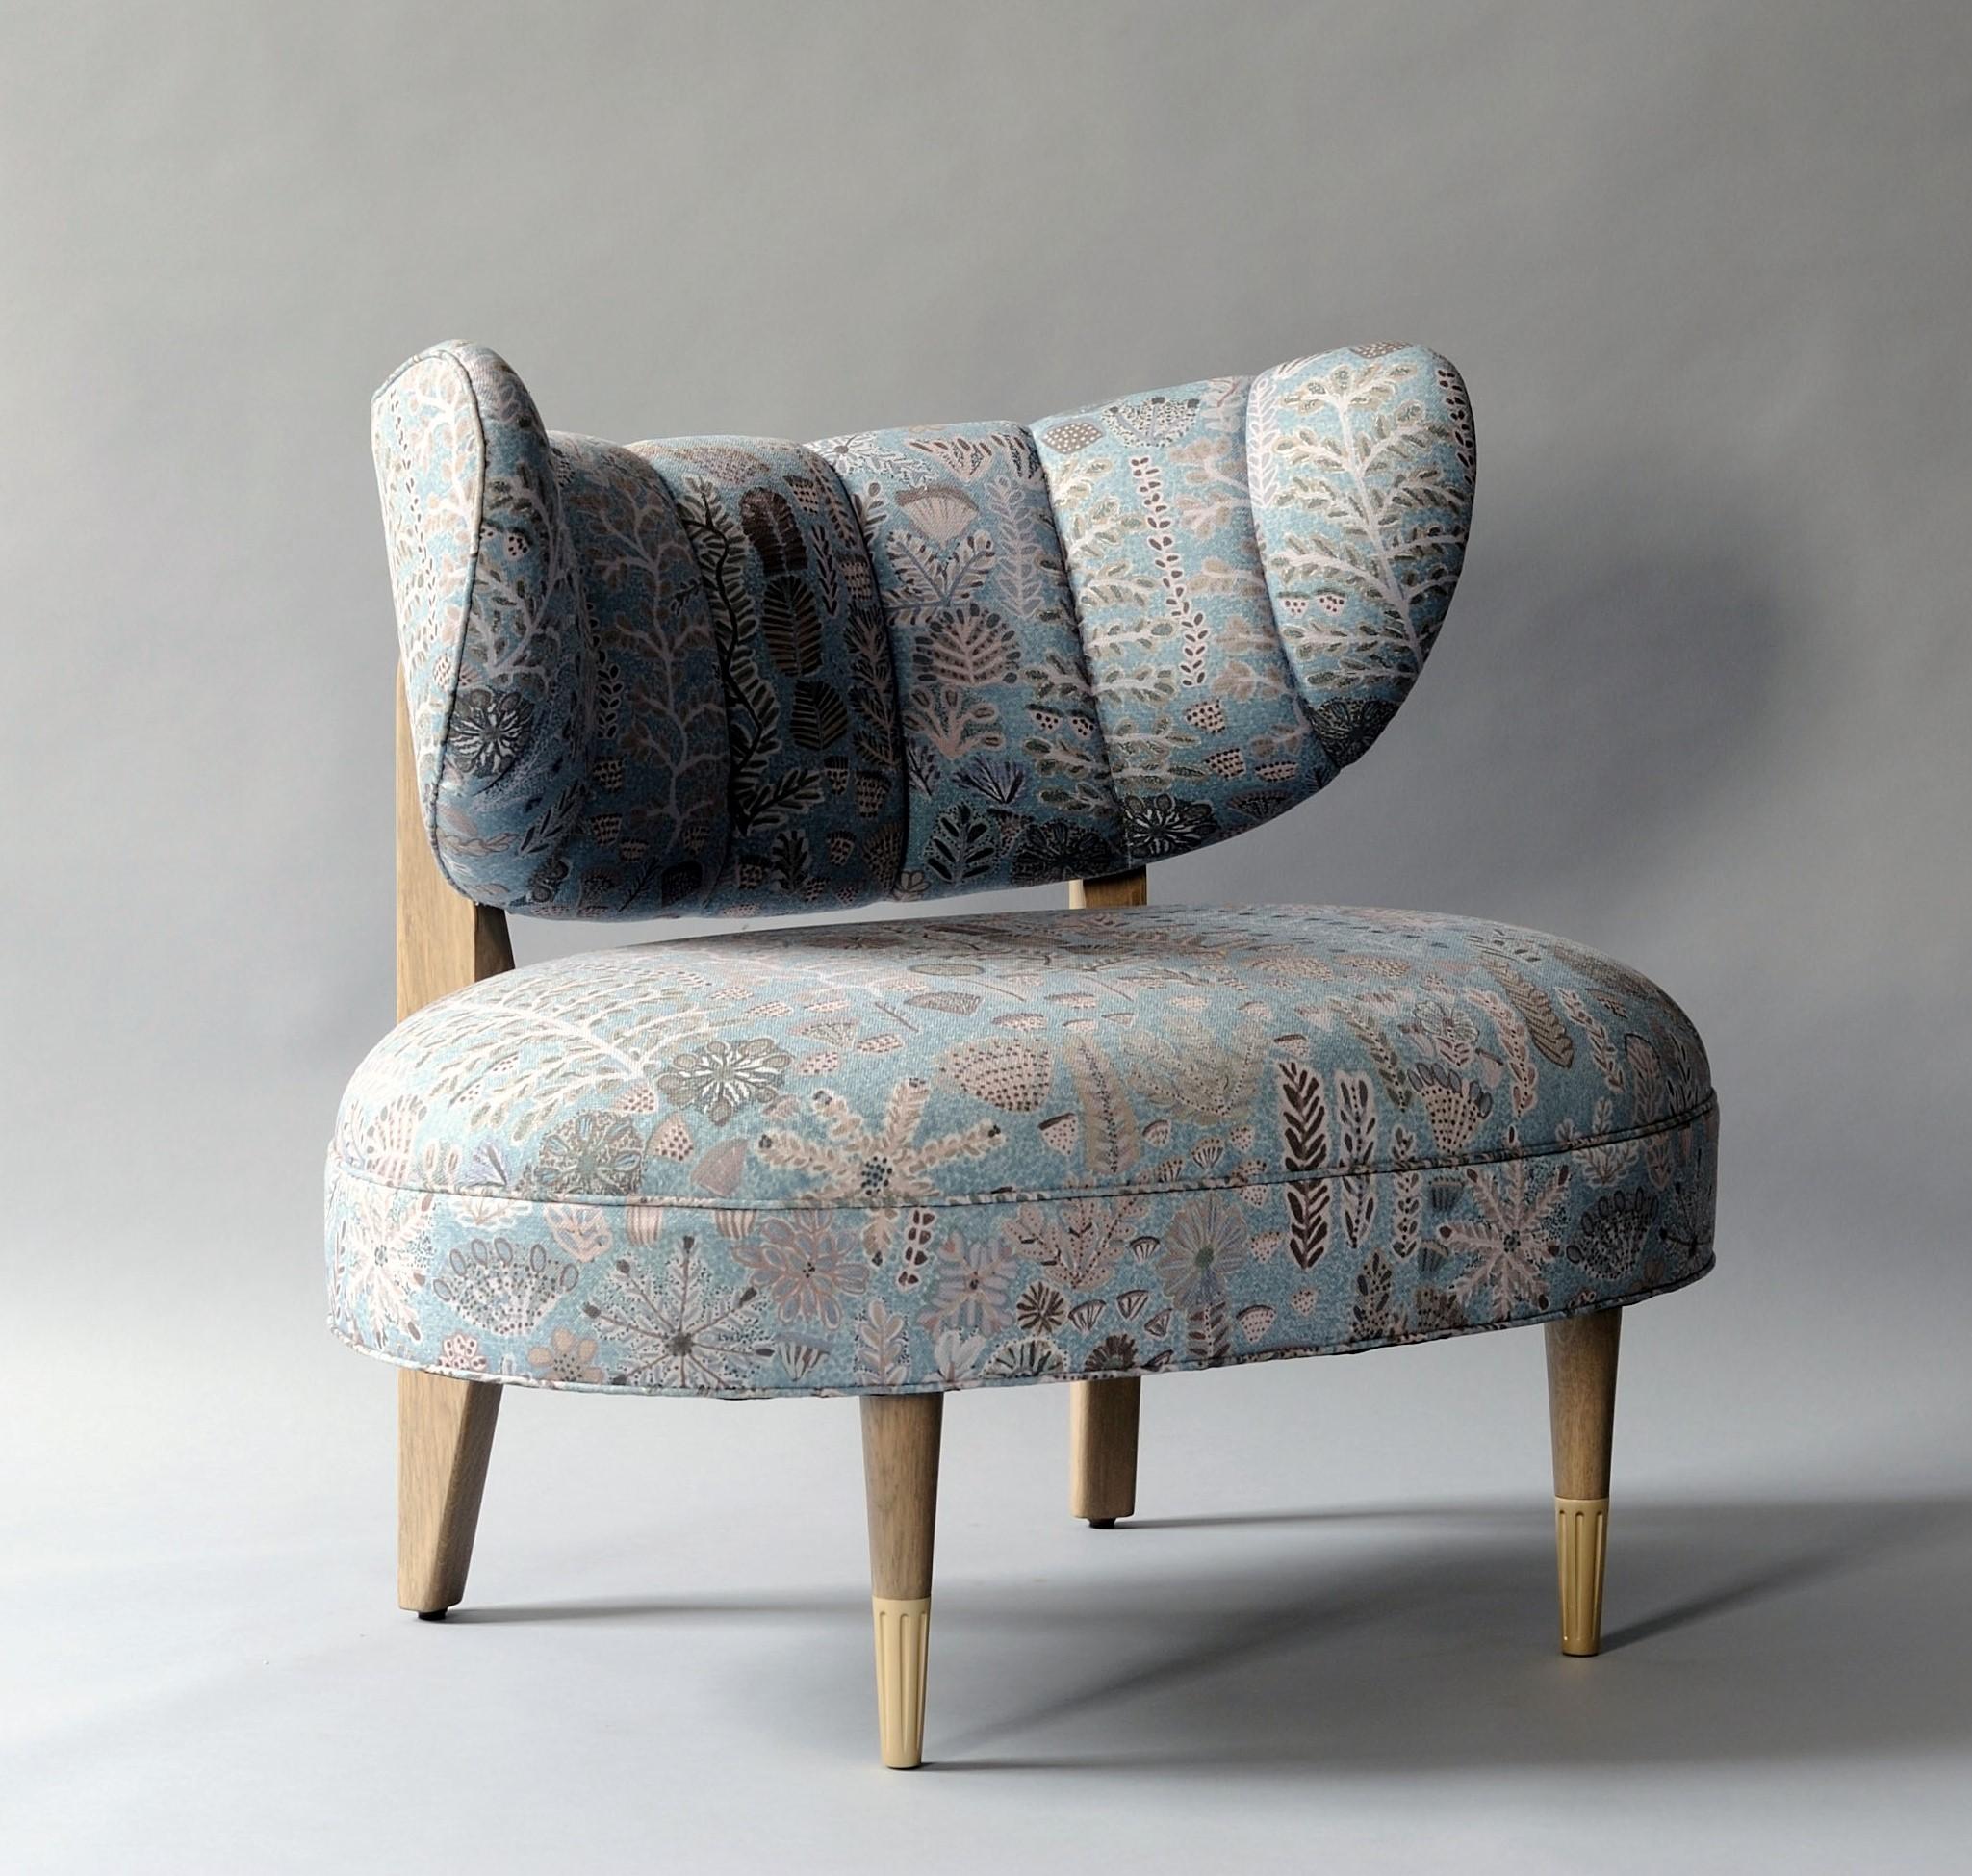 SAMPLE SALE PIECE FROM DEMURO DAS NYC SHOWROOM
Fabric differs from photographs of whole chair (see image of Imogen Heath fabric); Leg finishes are as shown in the photographs

IN STOCK: x1 Imogen Heath Sophy Velvet - Blue Dawn, Solid Grey Oak Legs